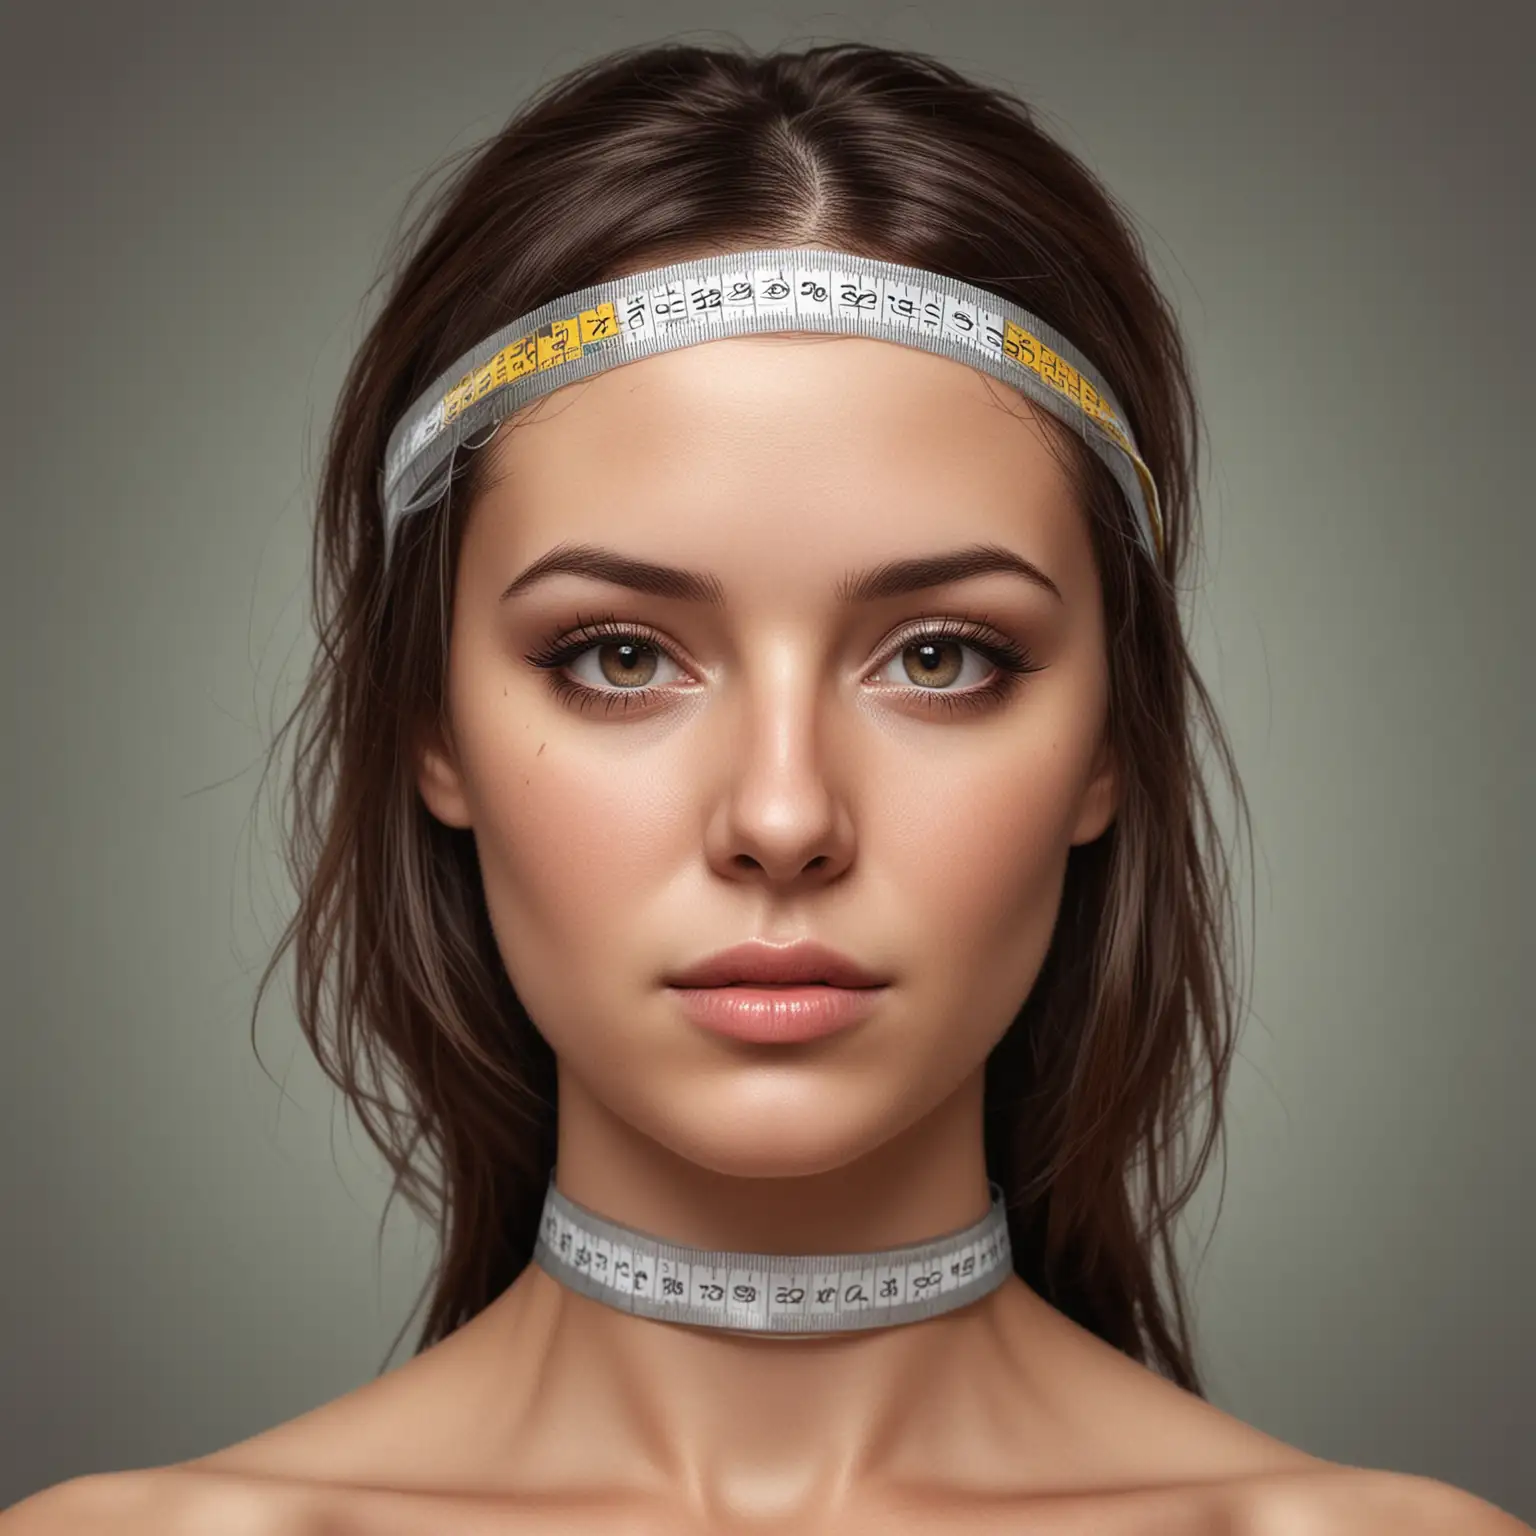 Realistic brunette woman head delicately wrapped in a measuring tape

